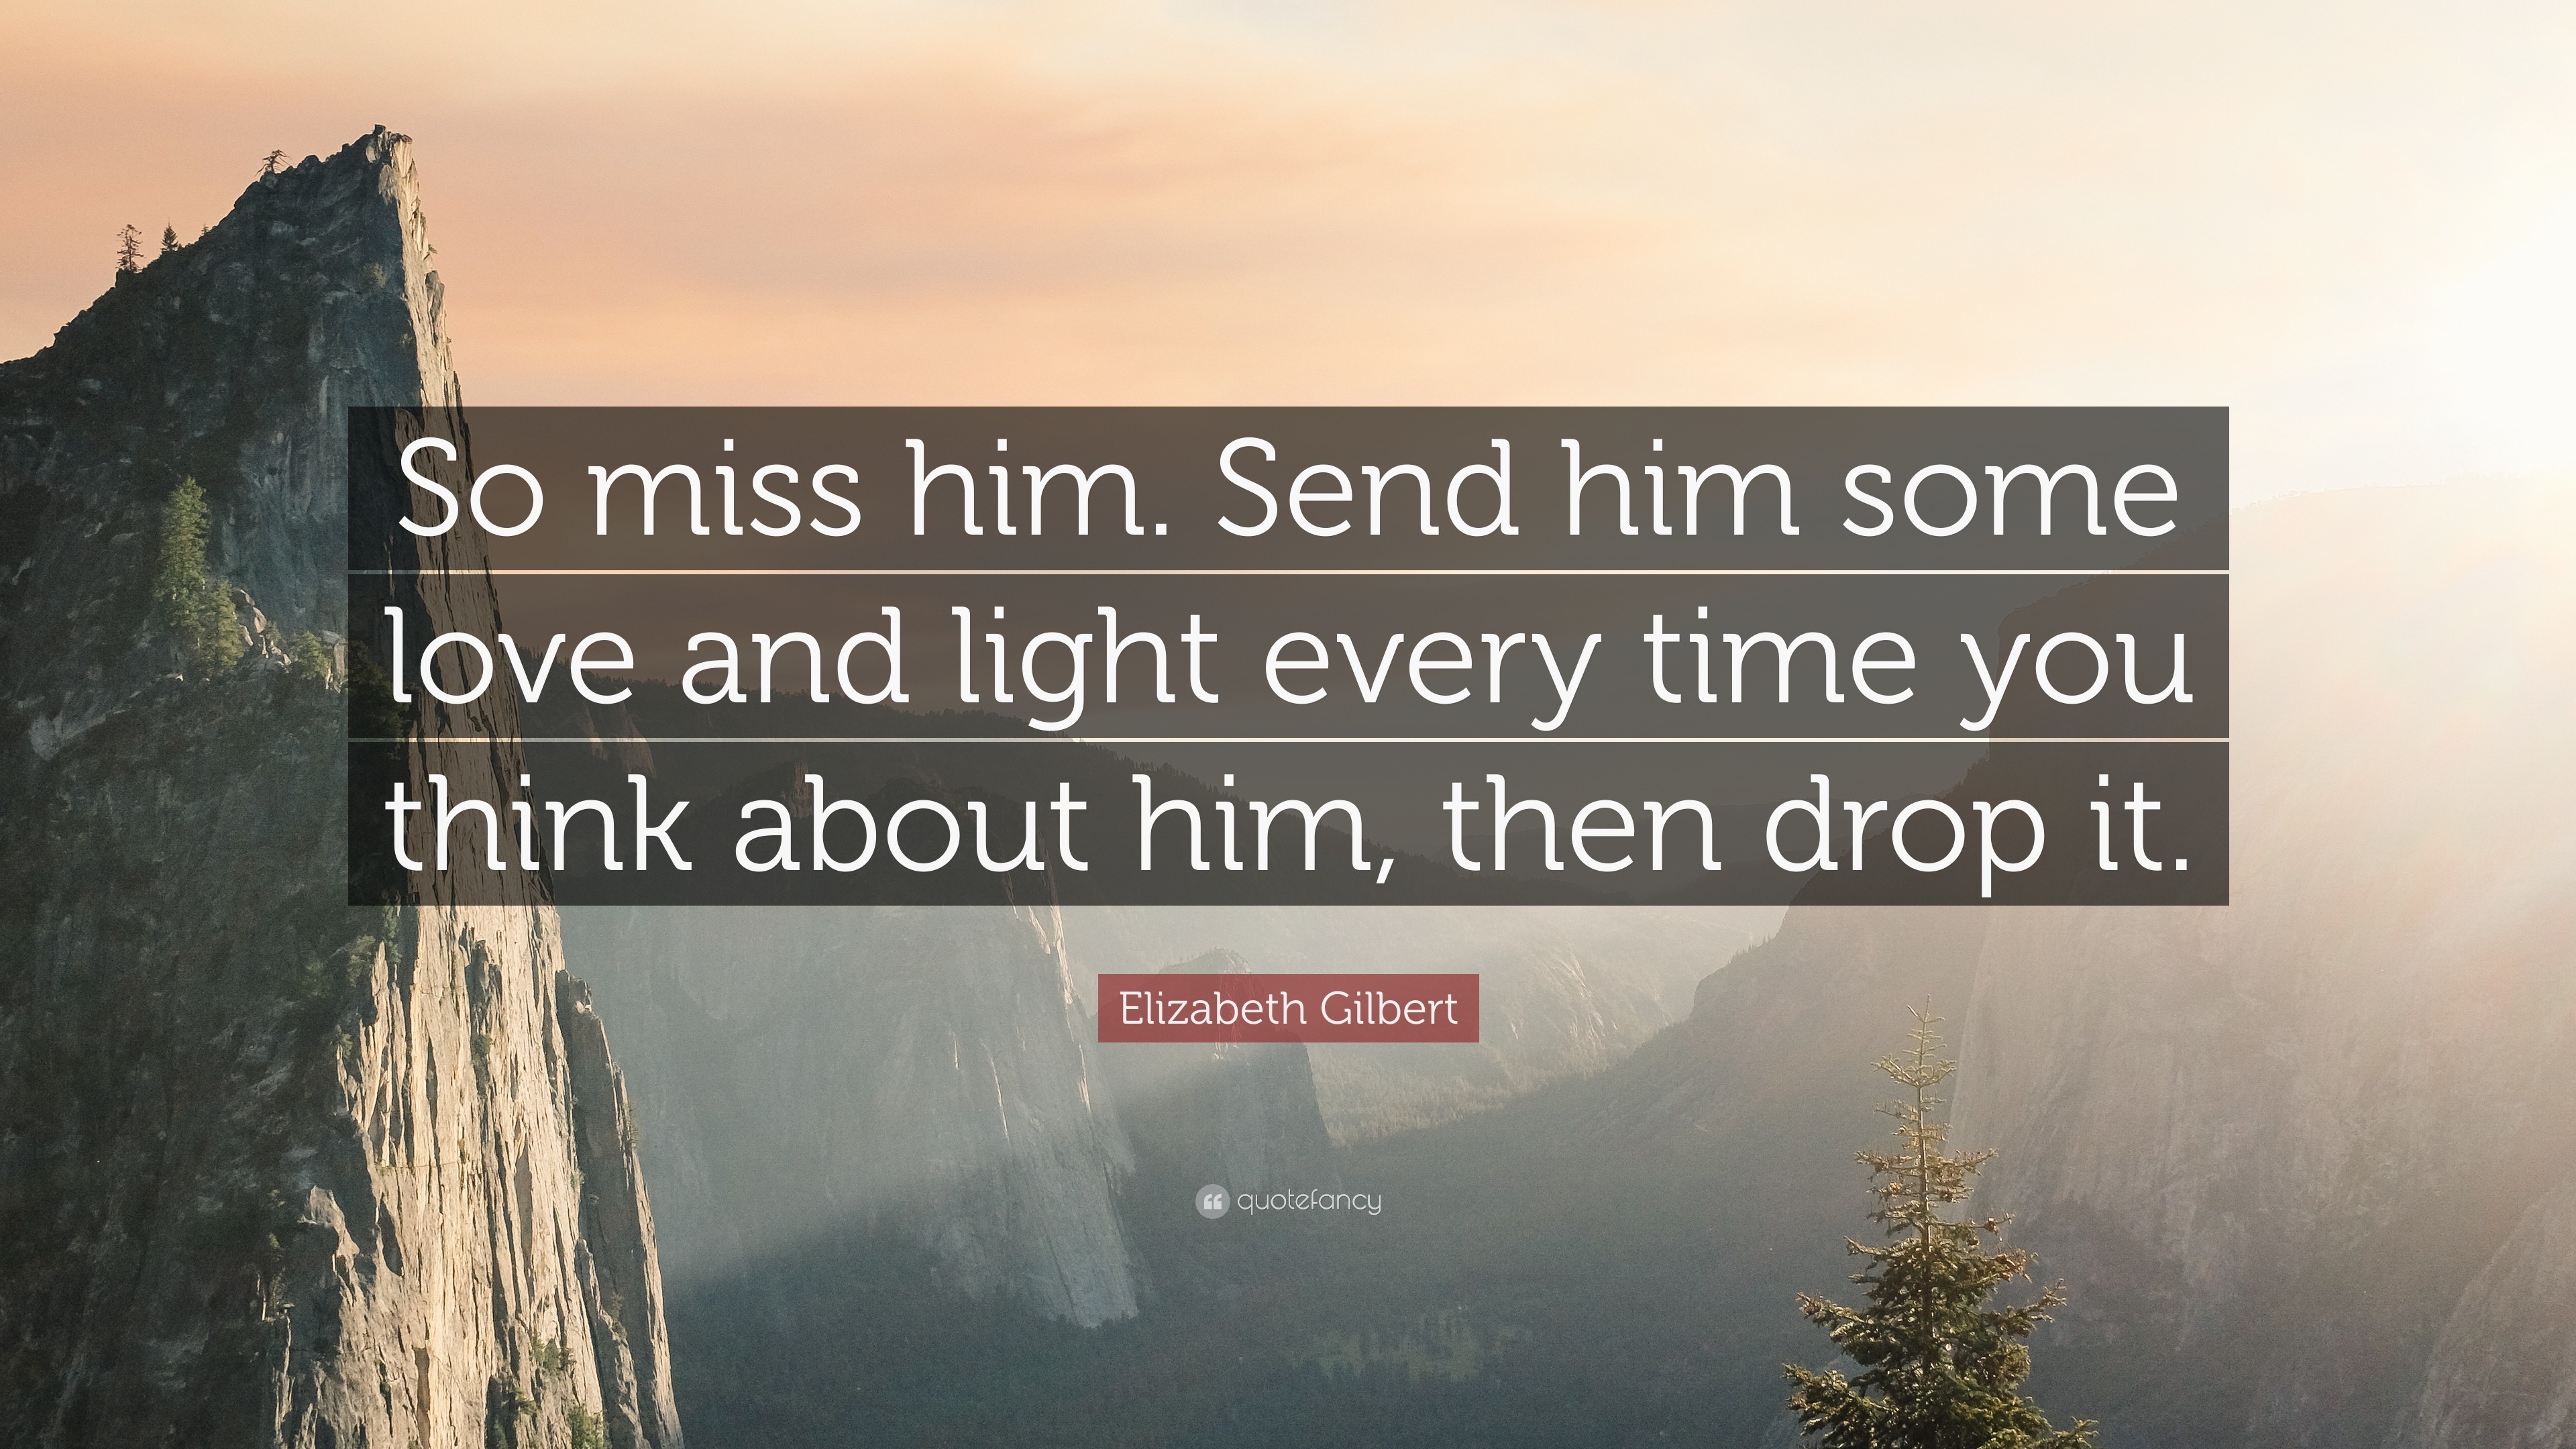 Elizabeth Gilbert Quote “So miss him Send him some love and light every